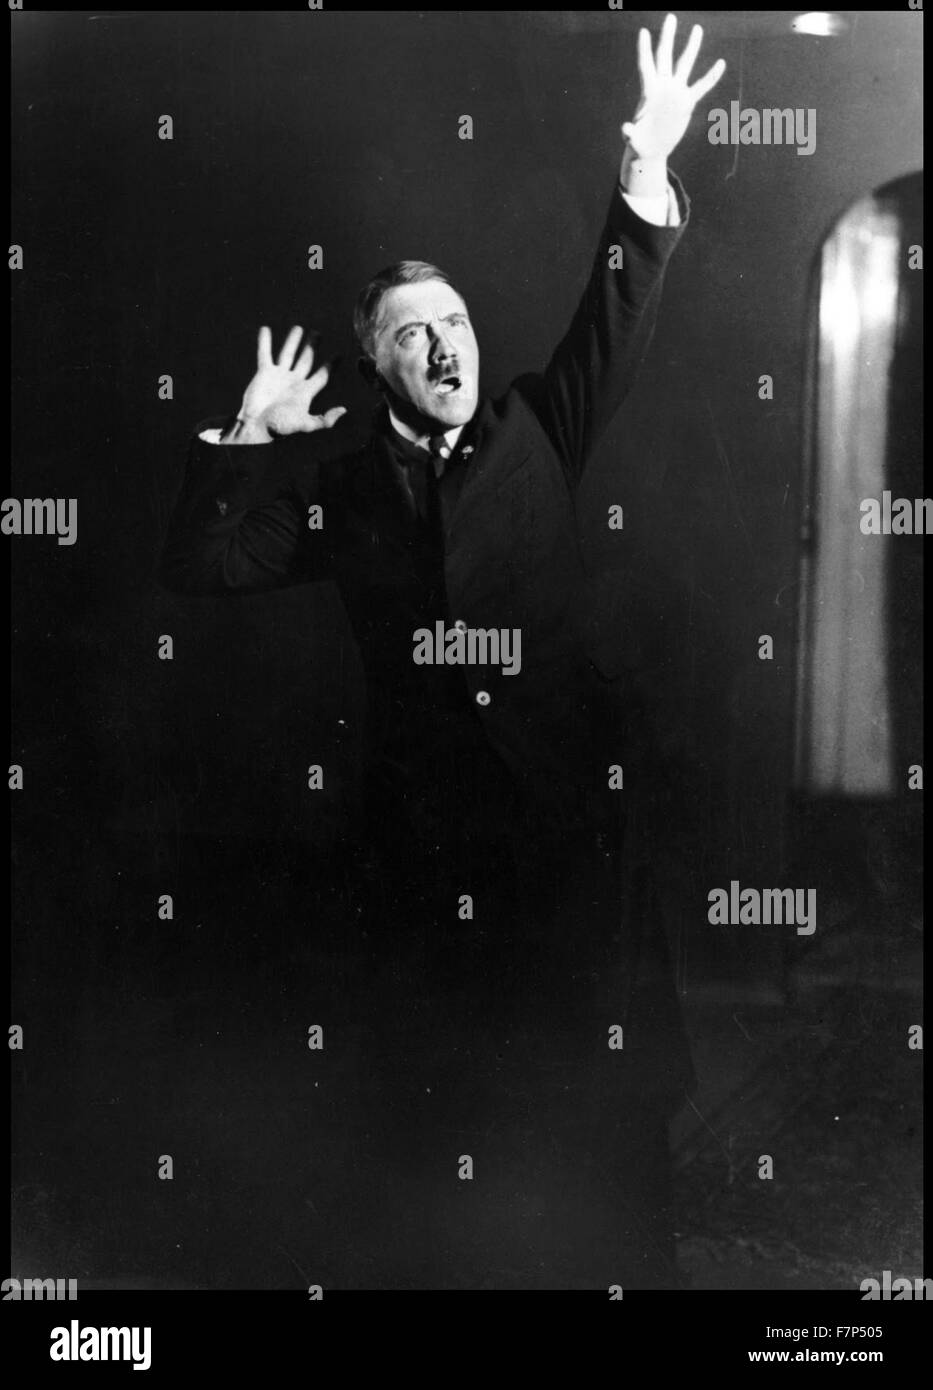 German Nazi leader Adolf Hitler (1889-1945) Austrian-born German politician who was the leader of the Nazi Party, rehearsing a speech in front of the mirror. Dated 1933 Stock Photo